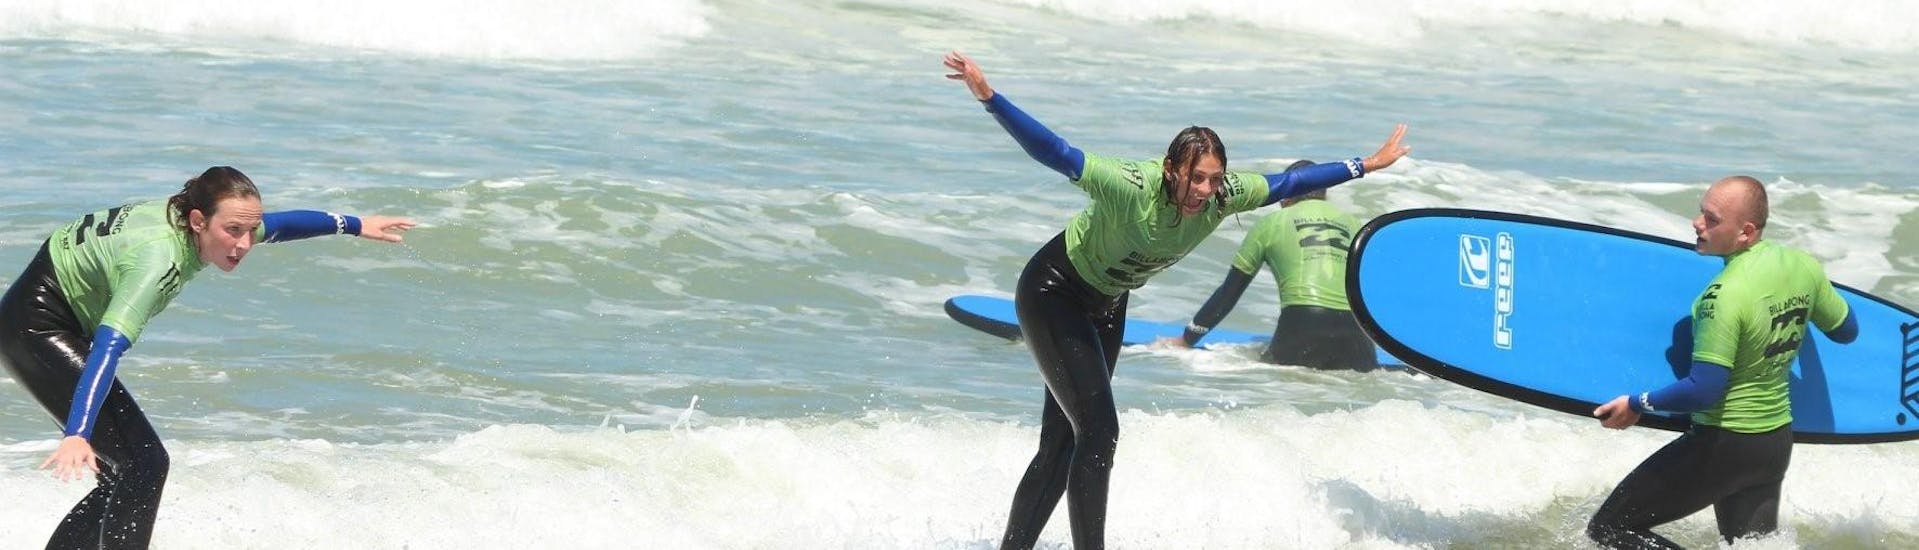 Surfing in Jeffreys Bay - Group Lessons.